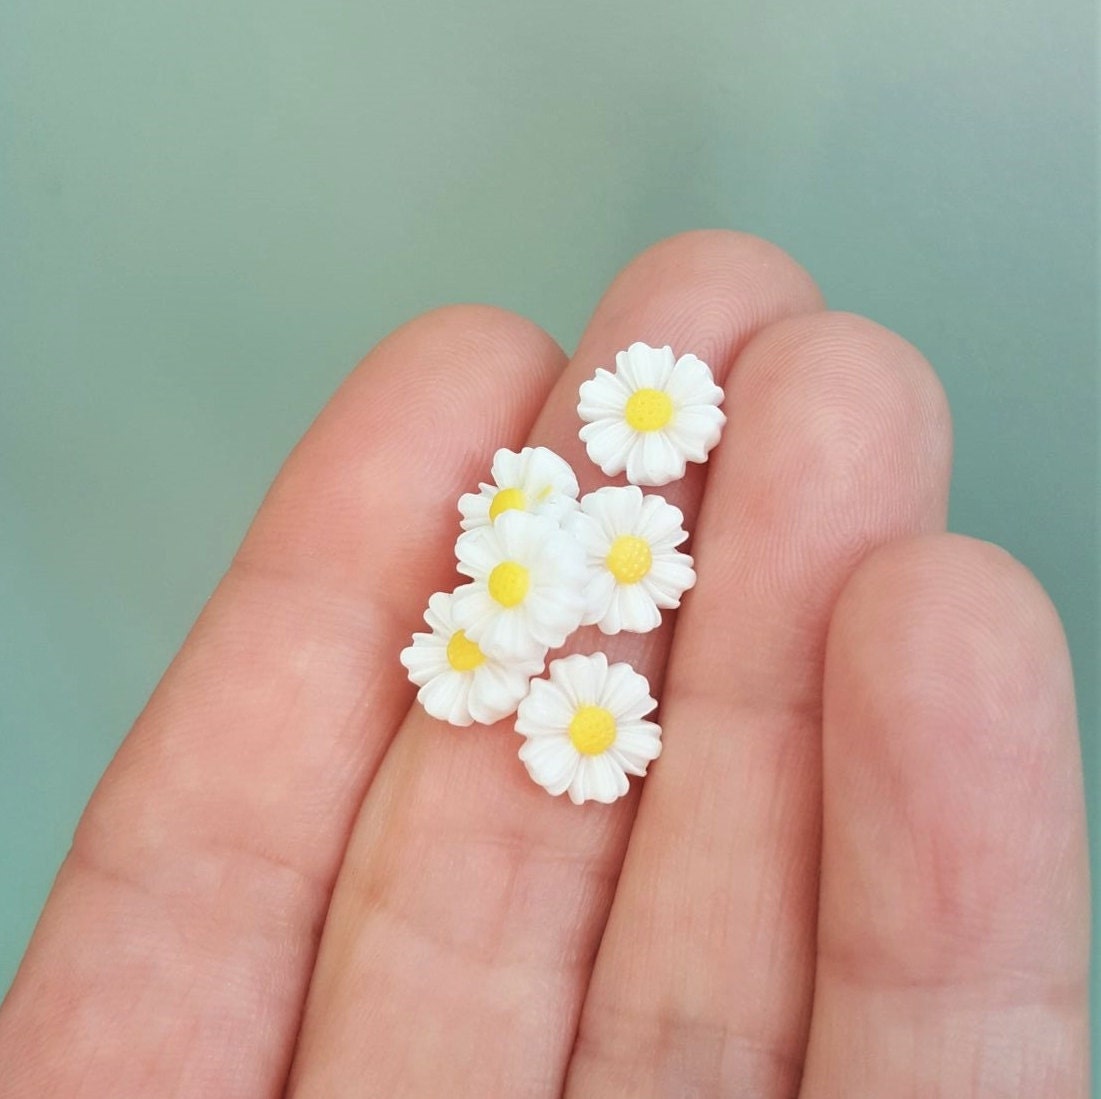 DAISY Pressed Flower Resin Crafts For DIY Art Jewelry Making 12pcs Dried  Daisy Flowers